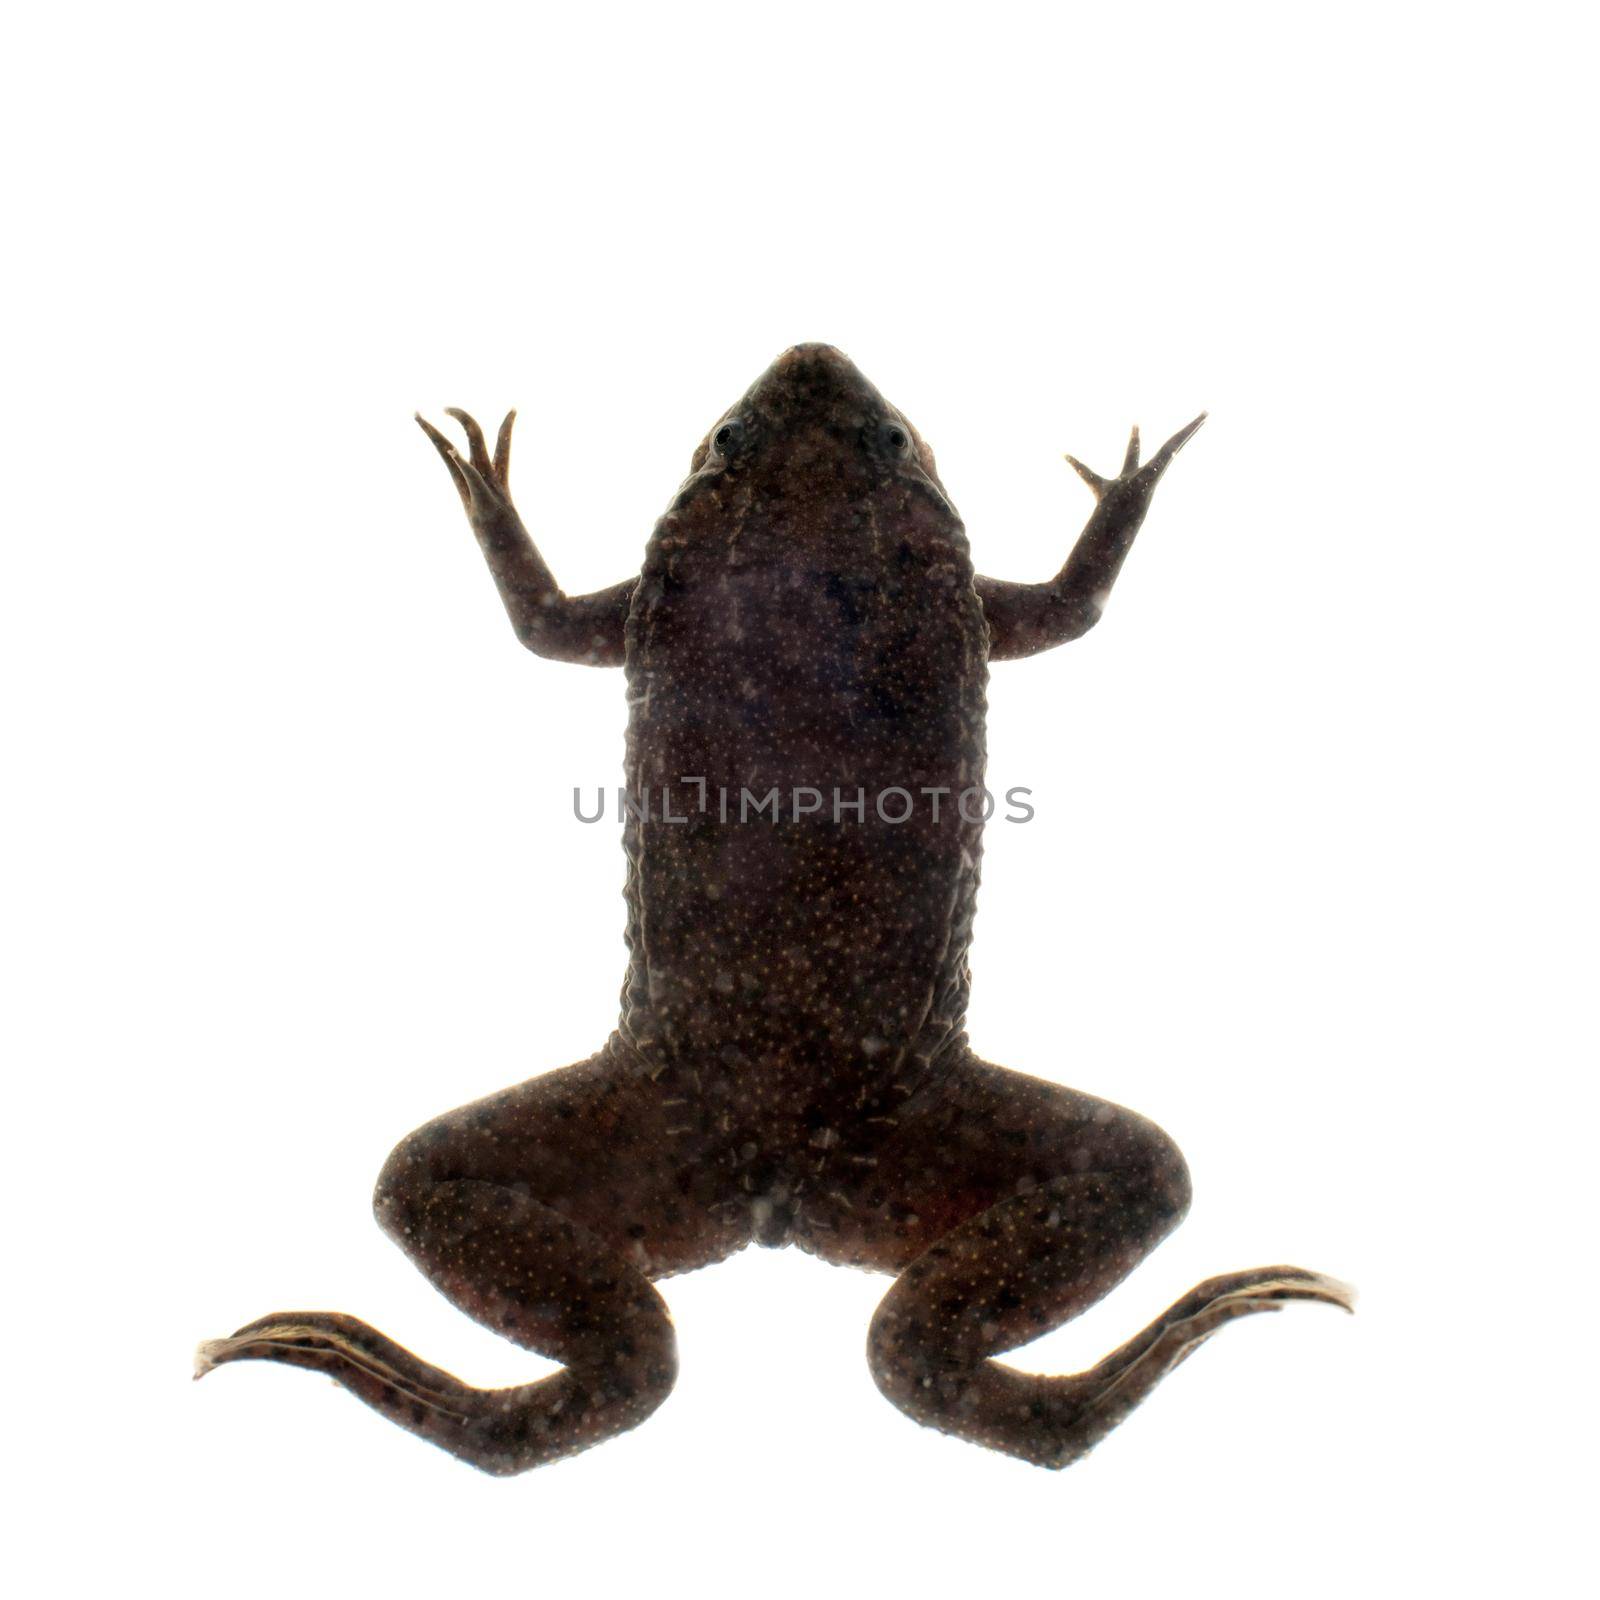 A Carvalho's Surinam toad on white background by RosaJay